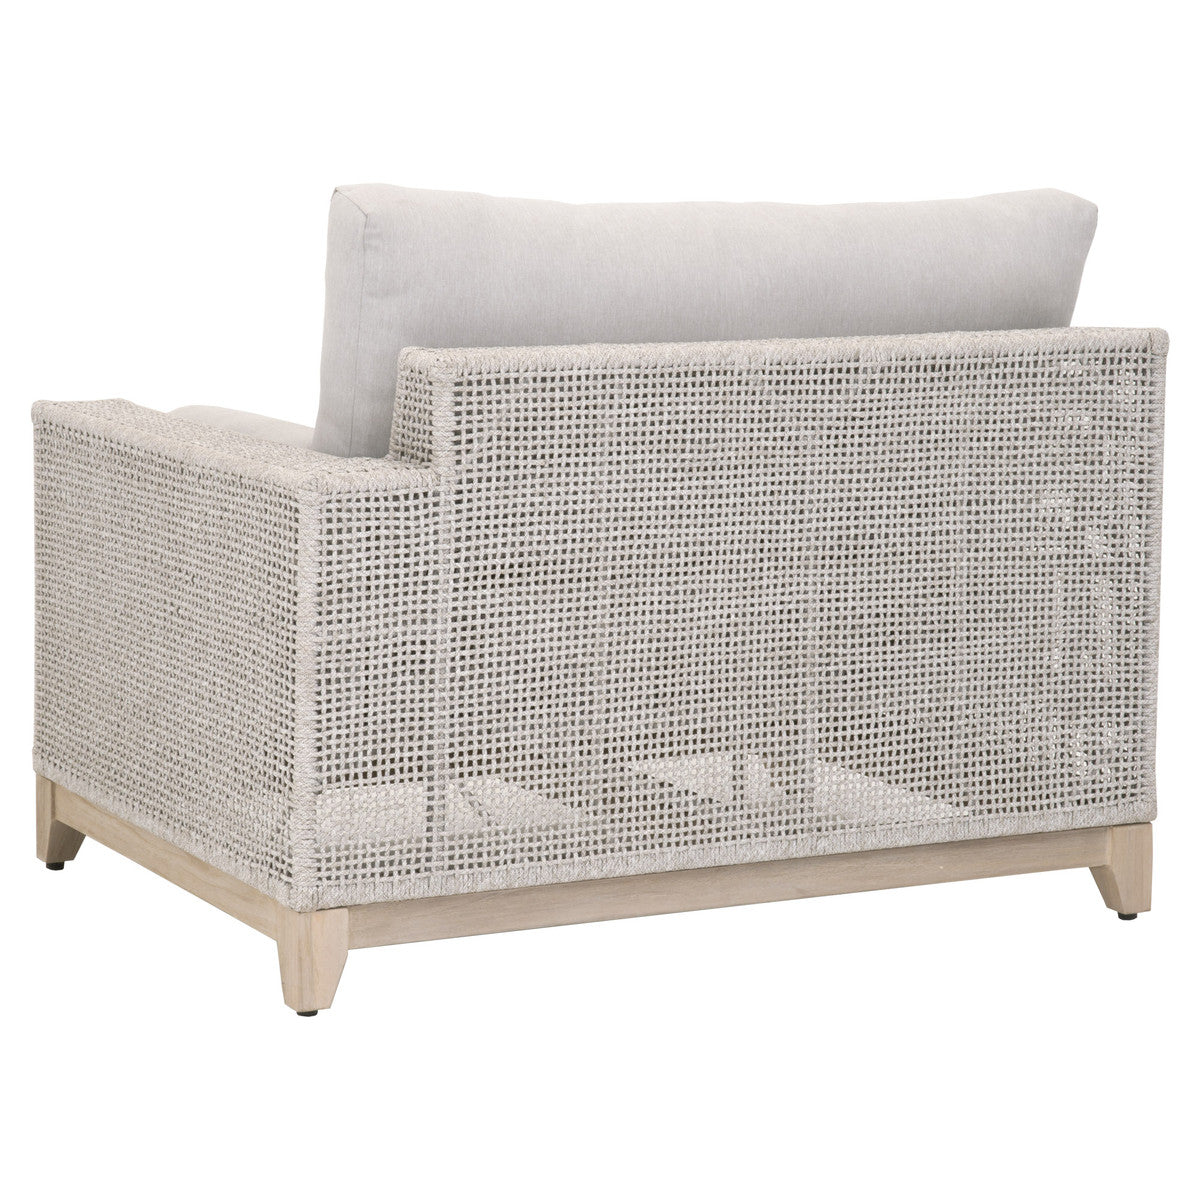 Tropez Outdoor Modular Right Facing 1-Arm Sofa in Taupe & White Flat Rope, Performance Pumice, Gray Teak - 6843-2S1R.WTA/PUM/GT